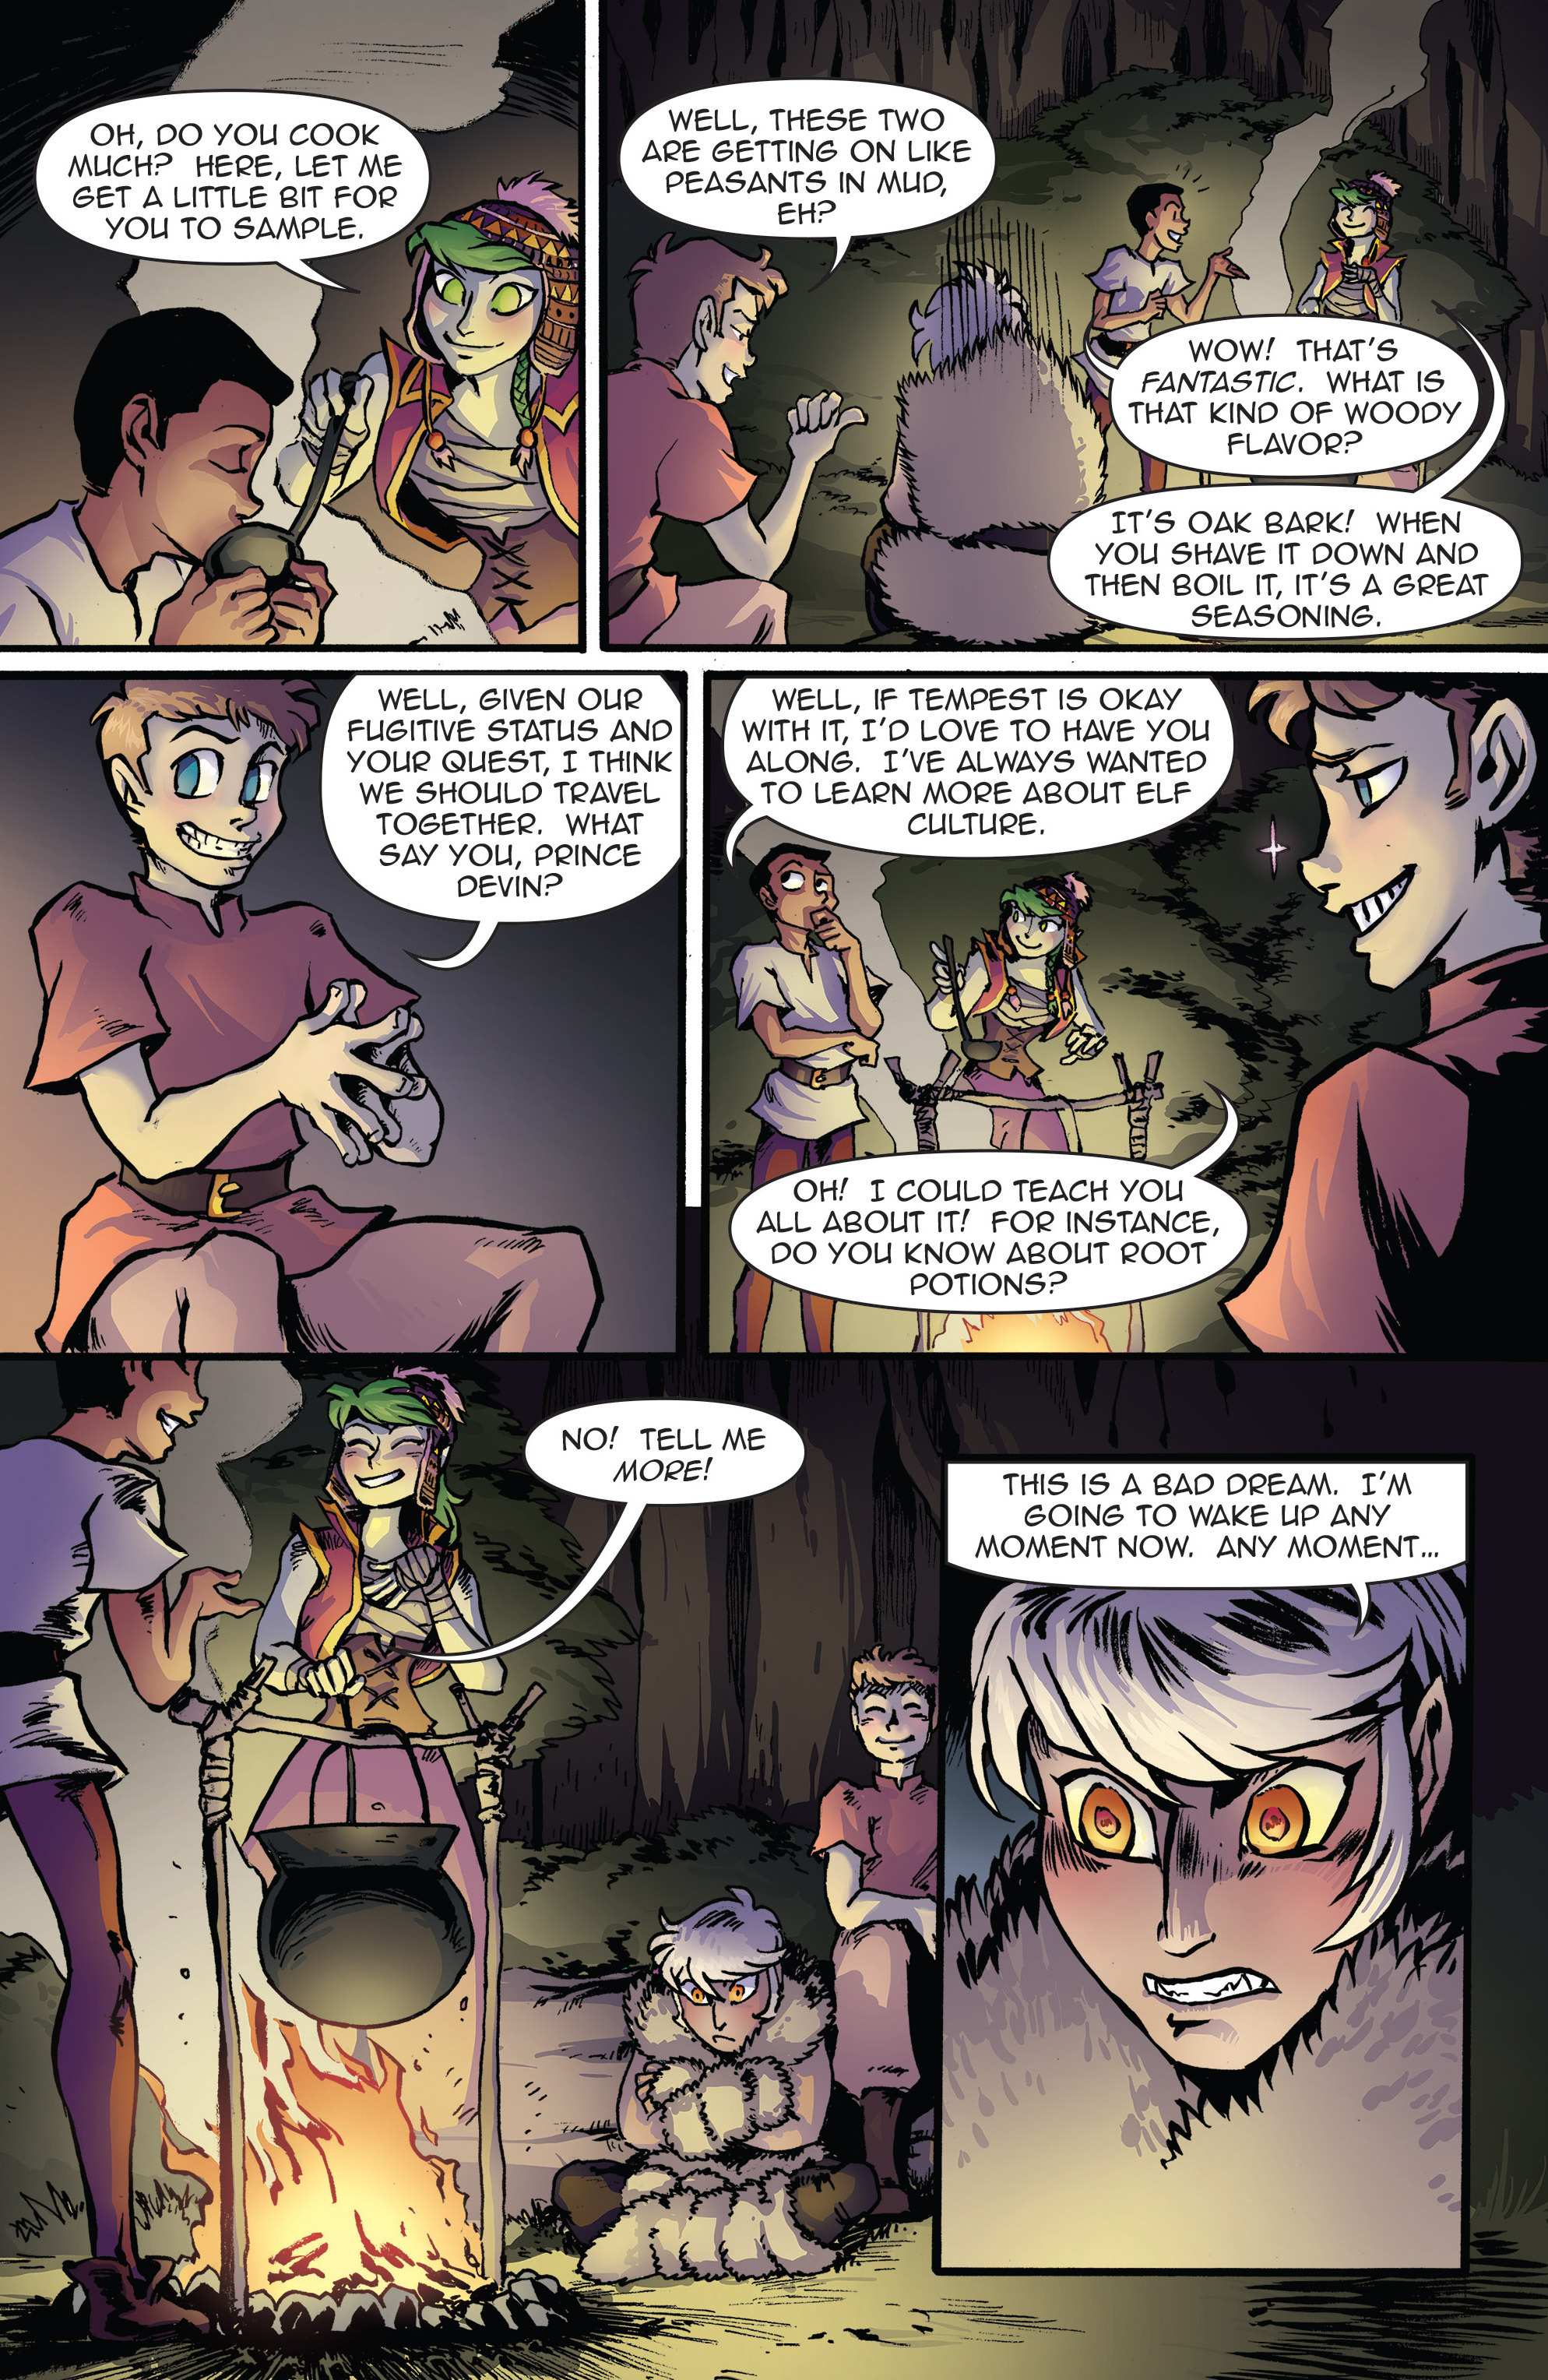 Read online Princeless: Make Yourself comic -  Issue #1 - 21